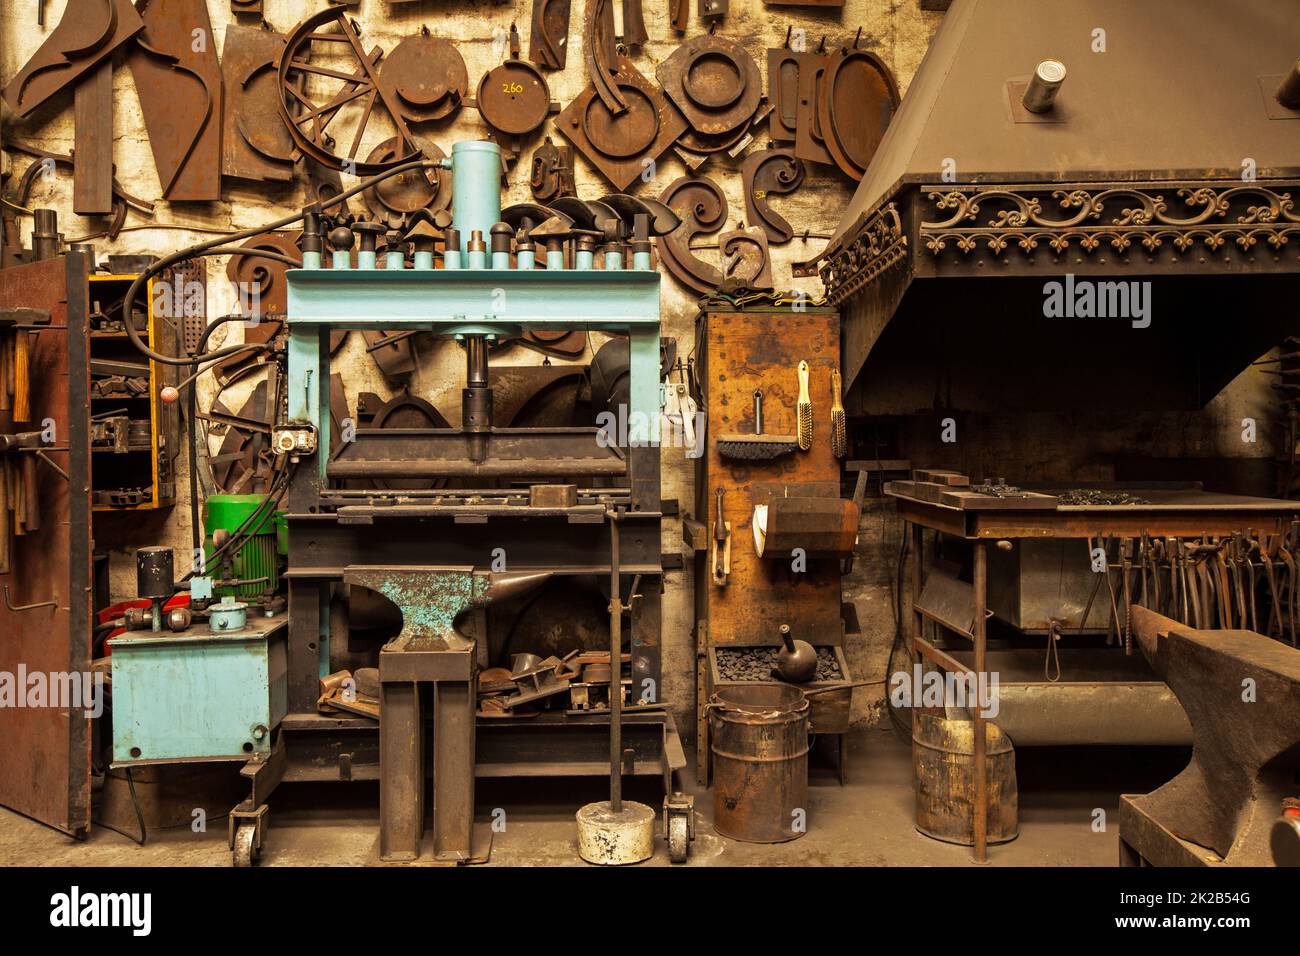 Craftsmanship and an appreciation for beautiful tools. a metal craftsmans workshop filled with metal tools. Stock Photo